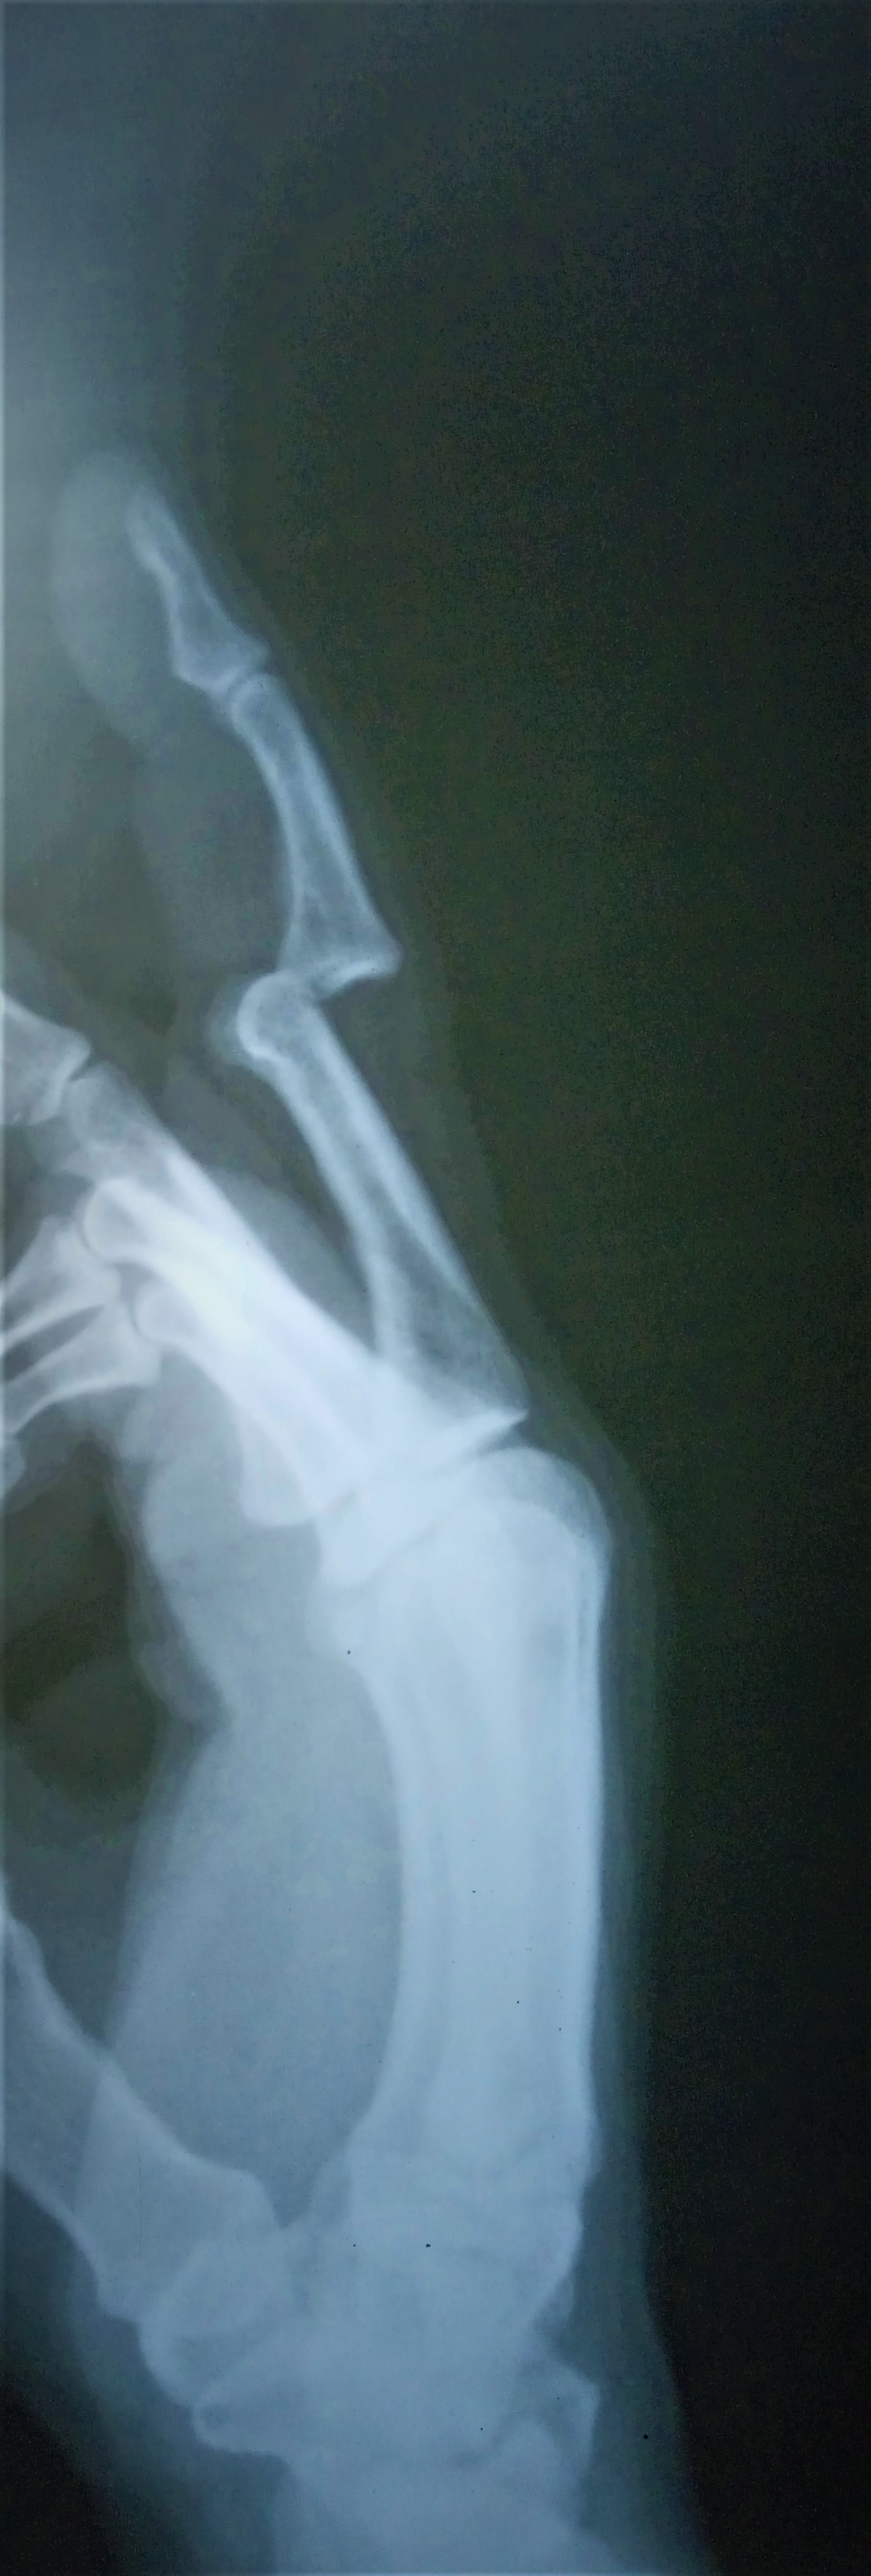 <p>Proximal Interphalangeal Joint Dorsal Dislocation</p>